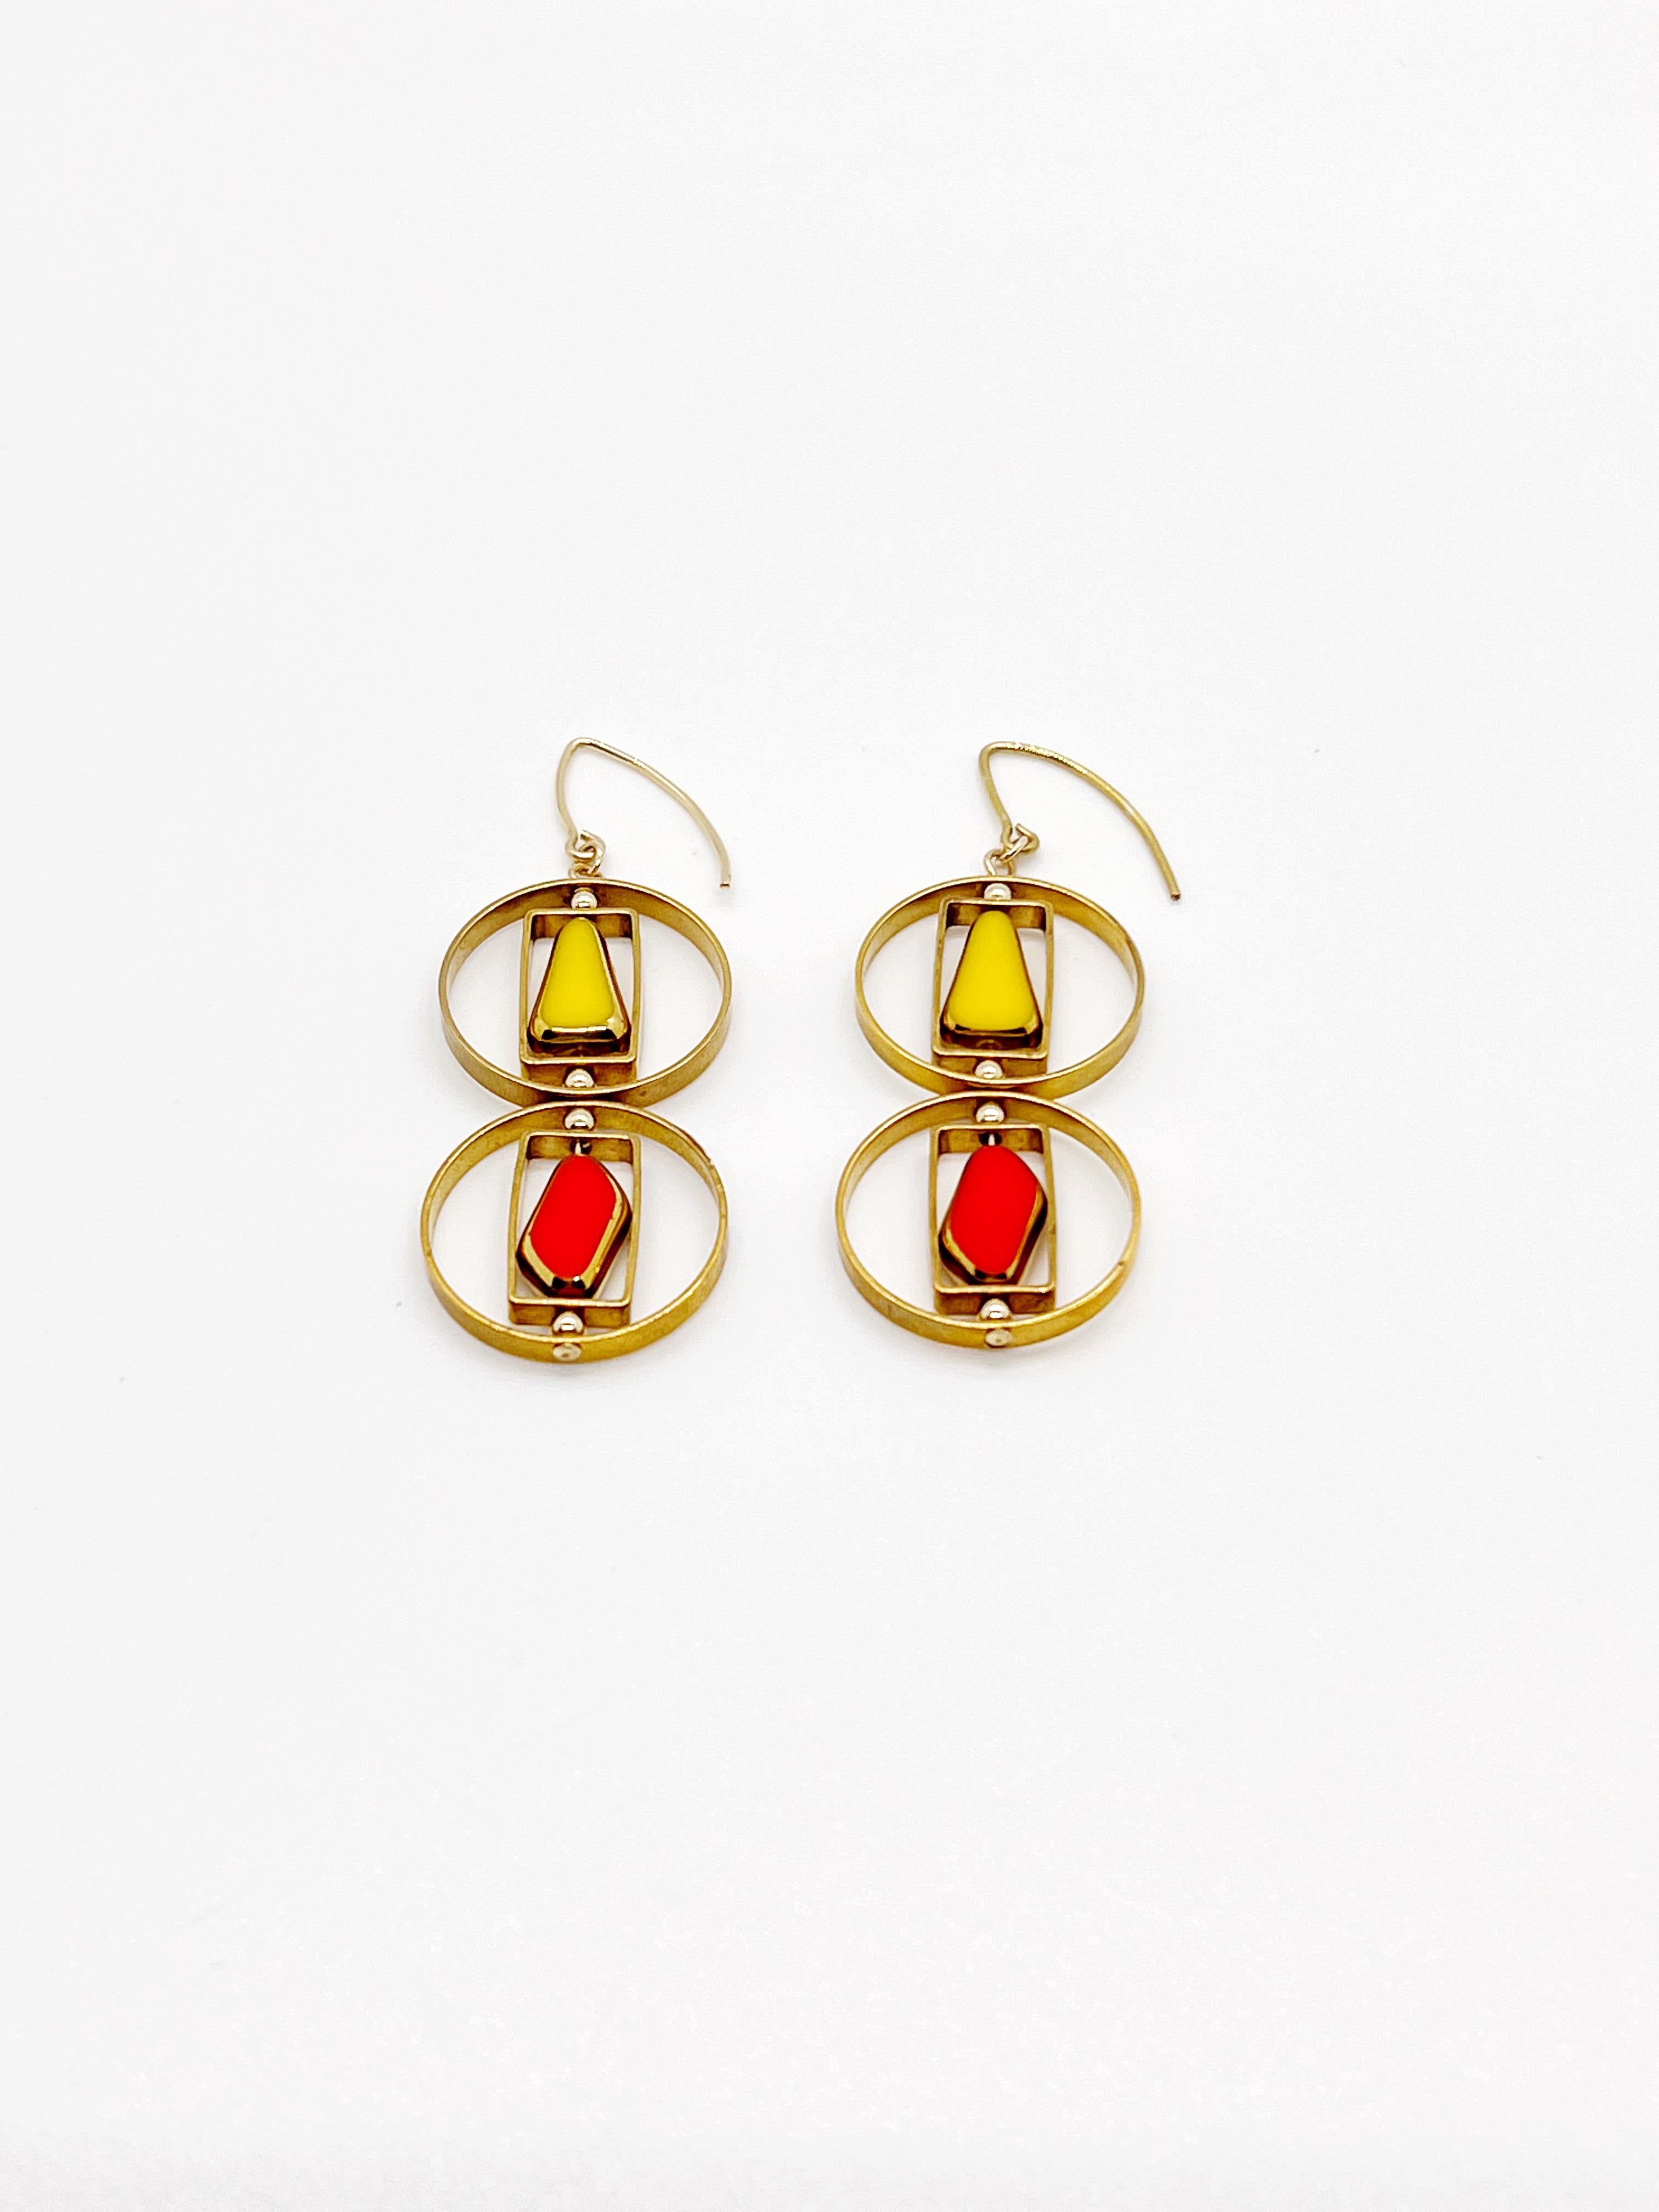 The earrings consist of a yellow orangey red vintage German glass beads that are framed with 24K gold. The beads were hand pressed during the 1920s-1960s. No two beads are exactly alike. These beads are no longer in production thus making them rare